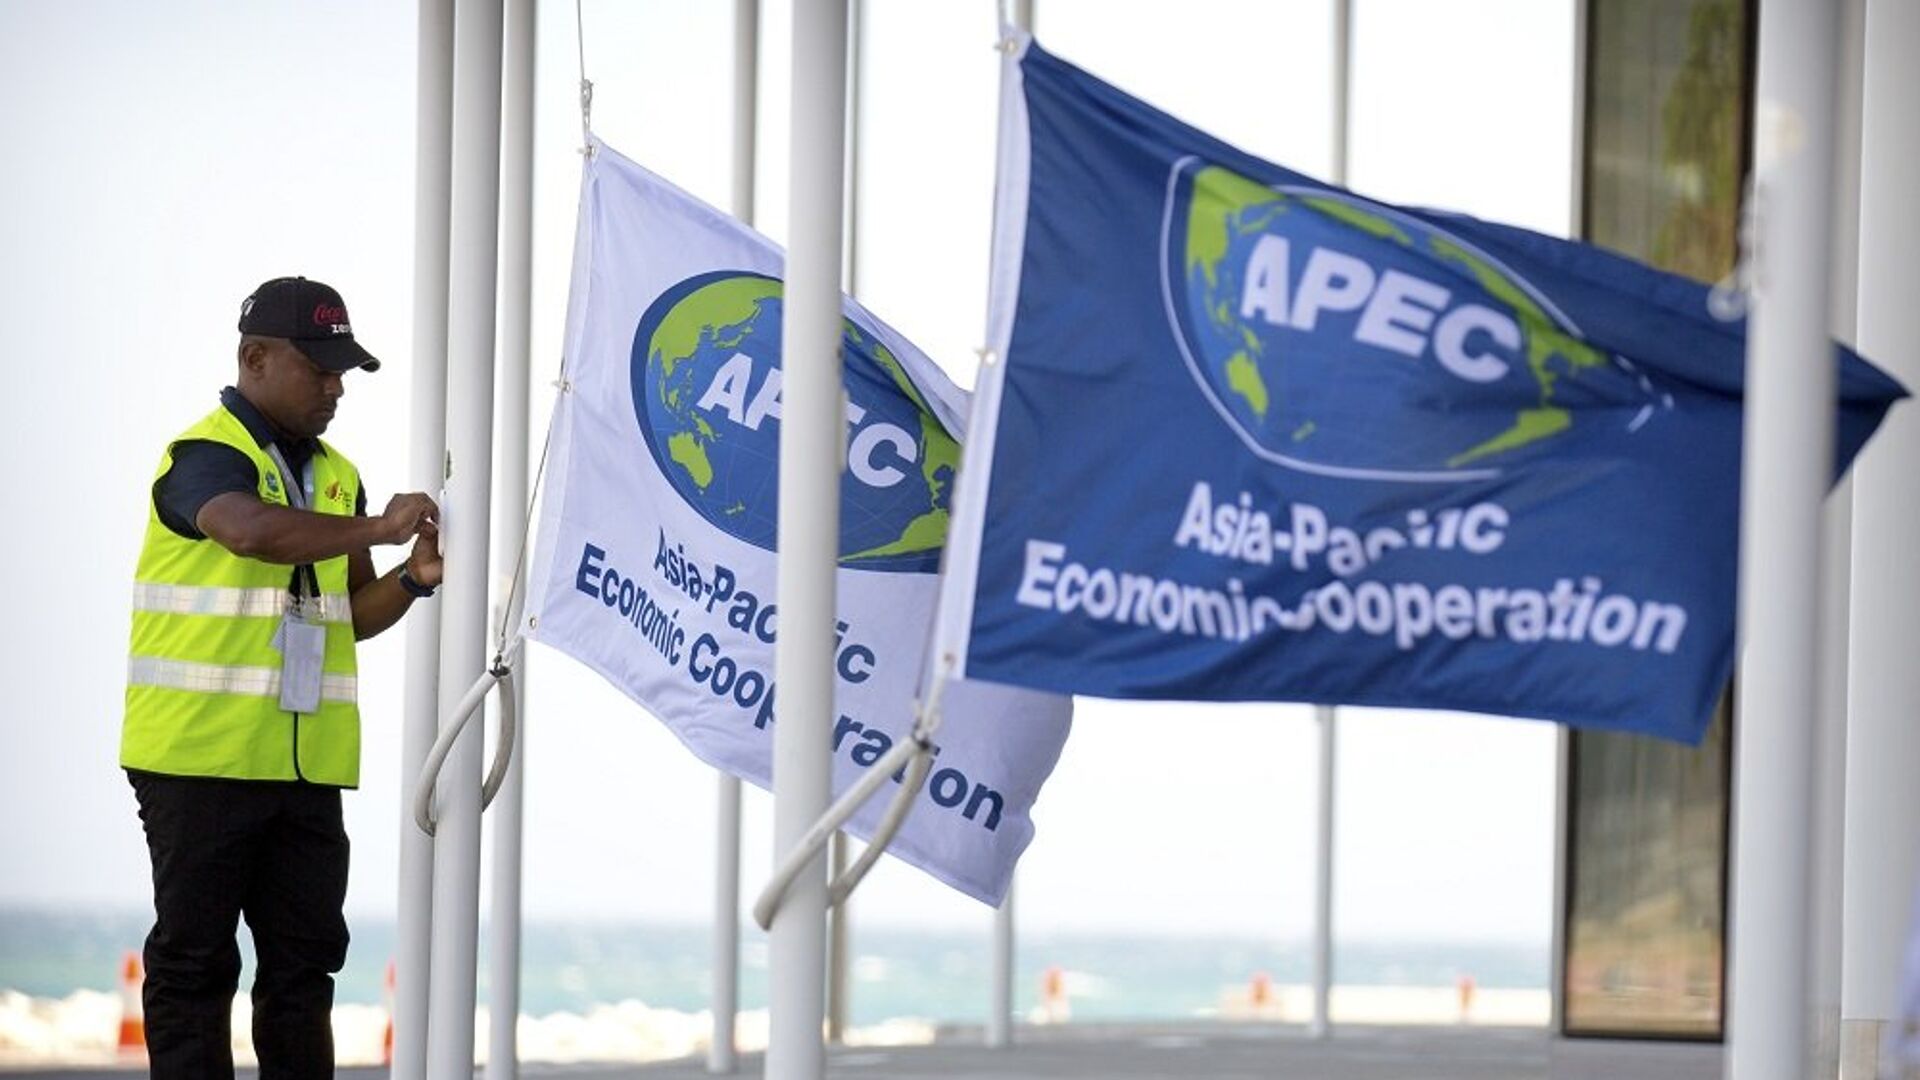 Tong APEC 2023 Challenges And Opportunities